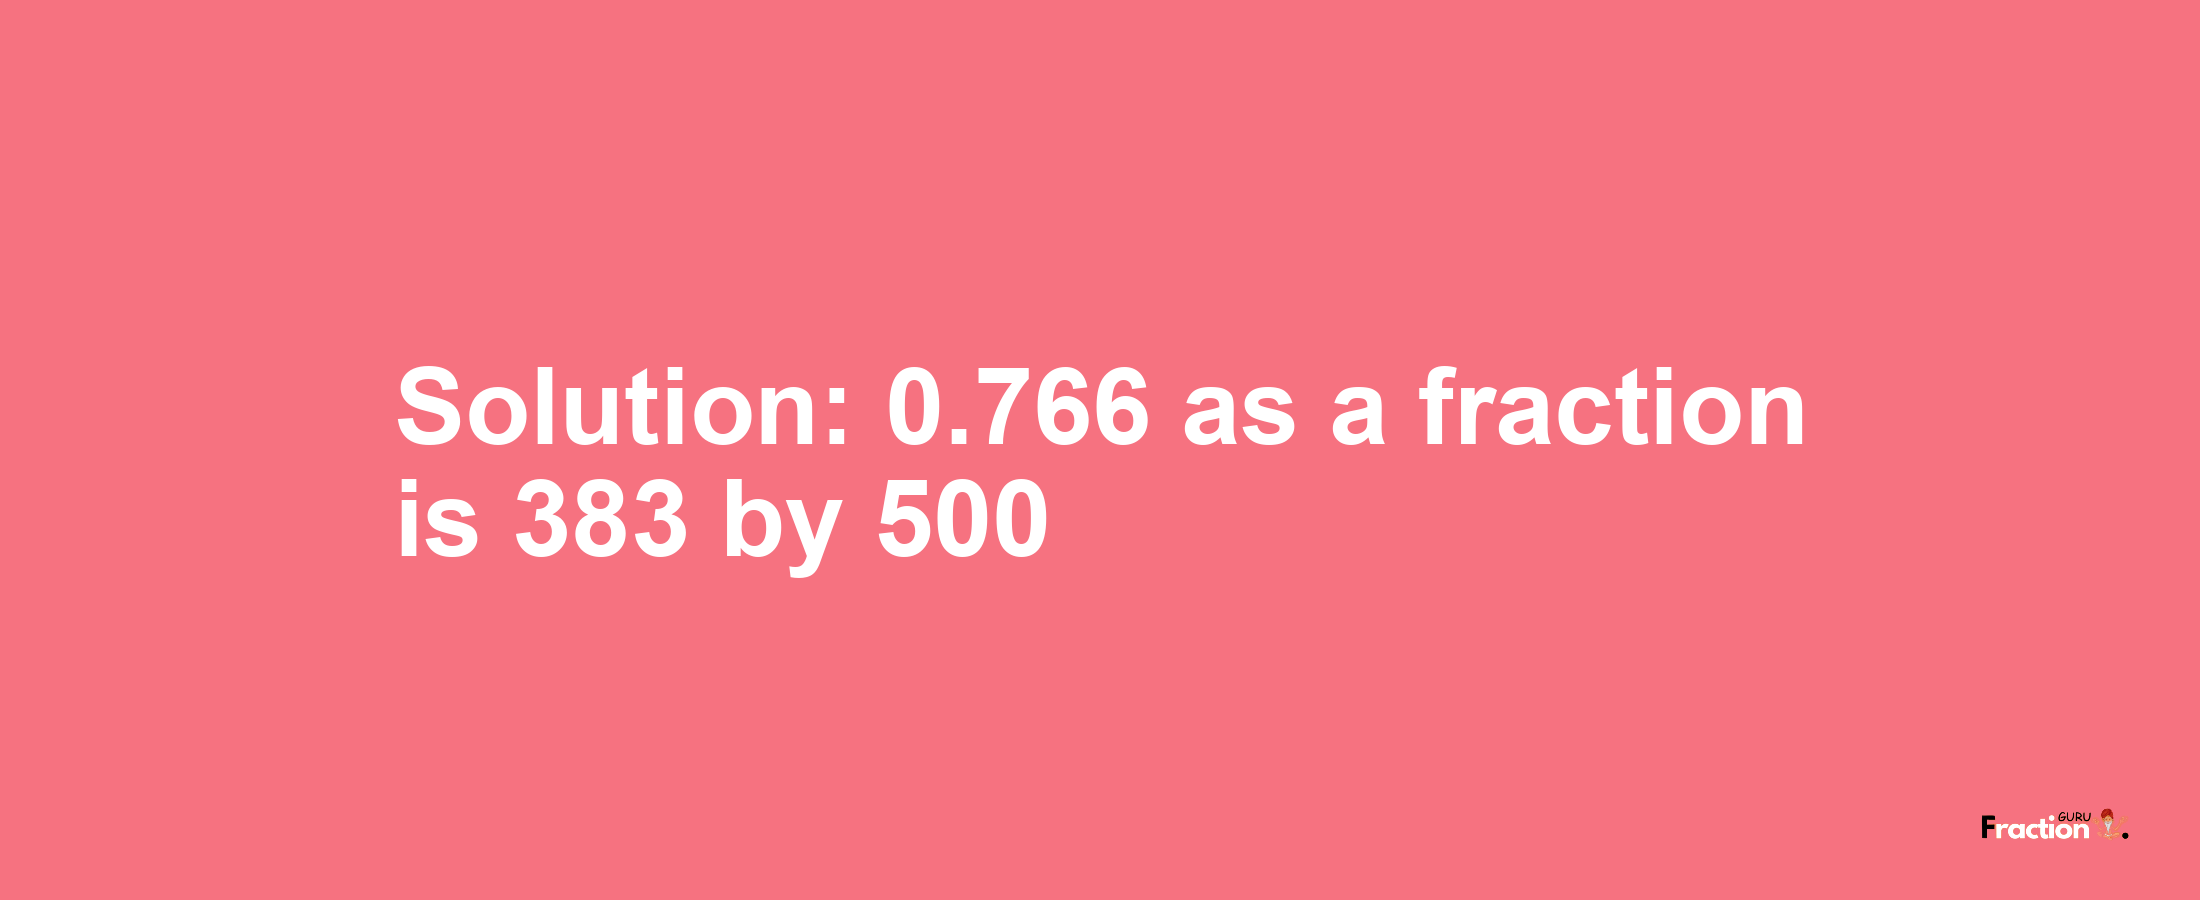 Solution:0.766 as a fraction is 383/500